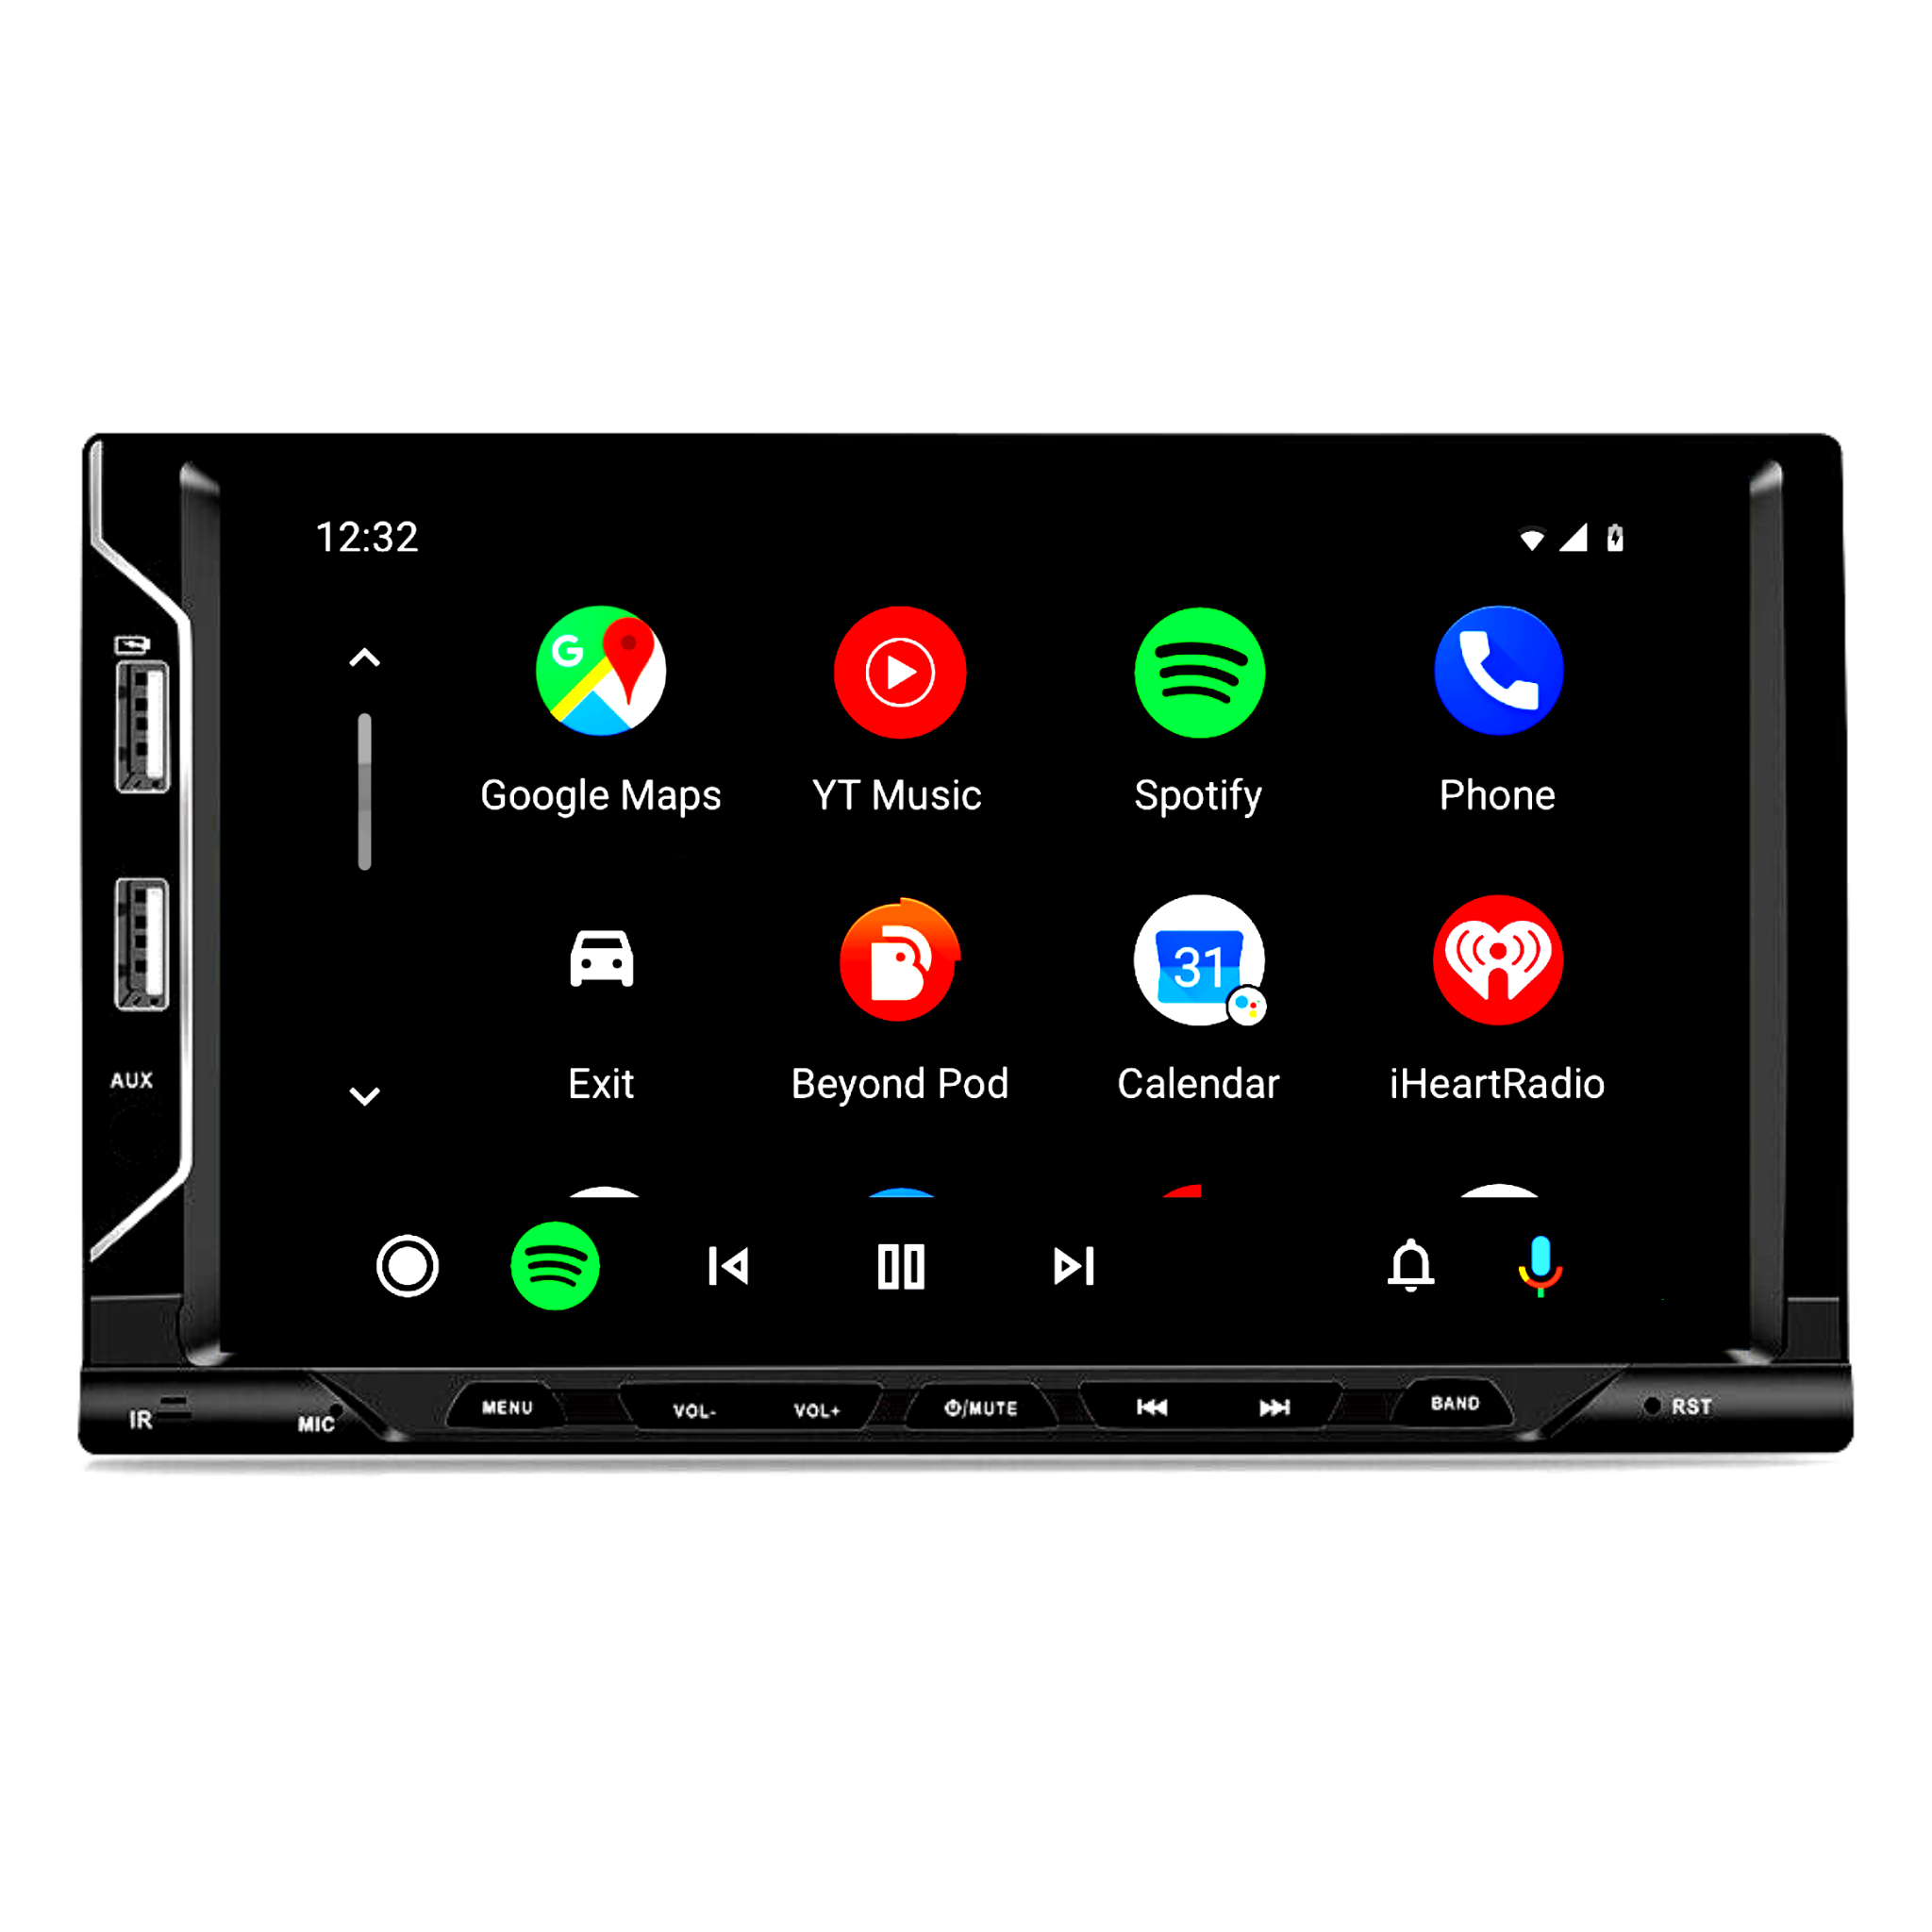 Wireless Apple CarPlay & Wired Android Auto 7 Inch Touchscreen Head Unit w/ 2 USB ports + Button Control